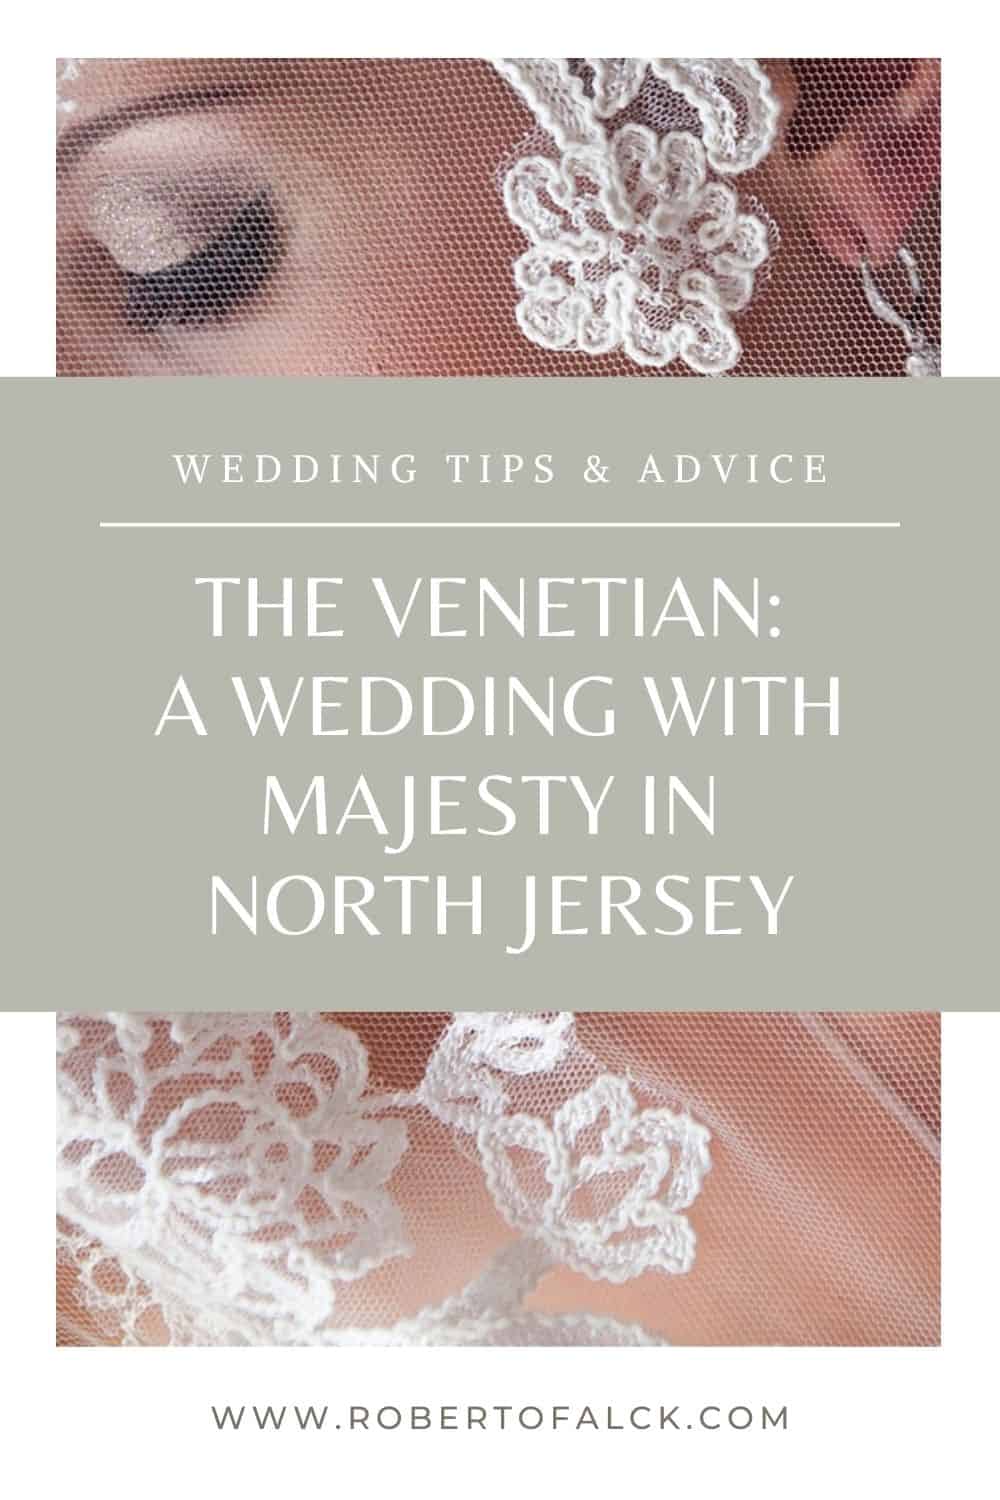 The Venetian NJ: A Wedding with Majesty and Magnificence in North Jersey